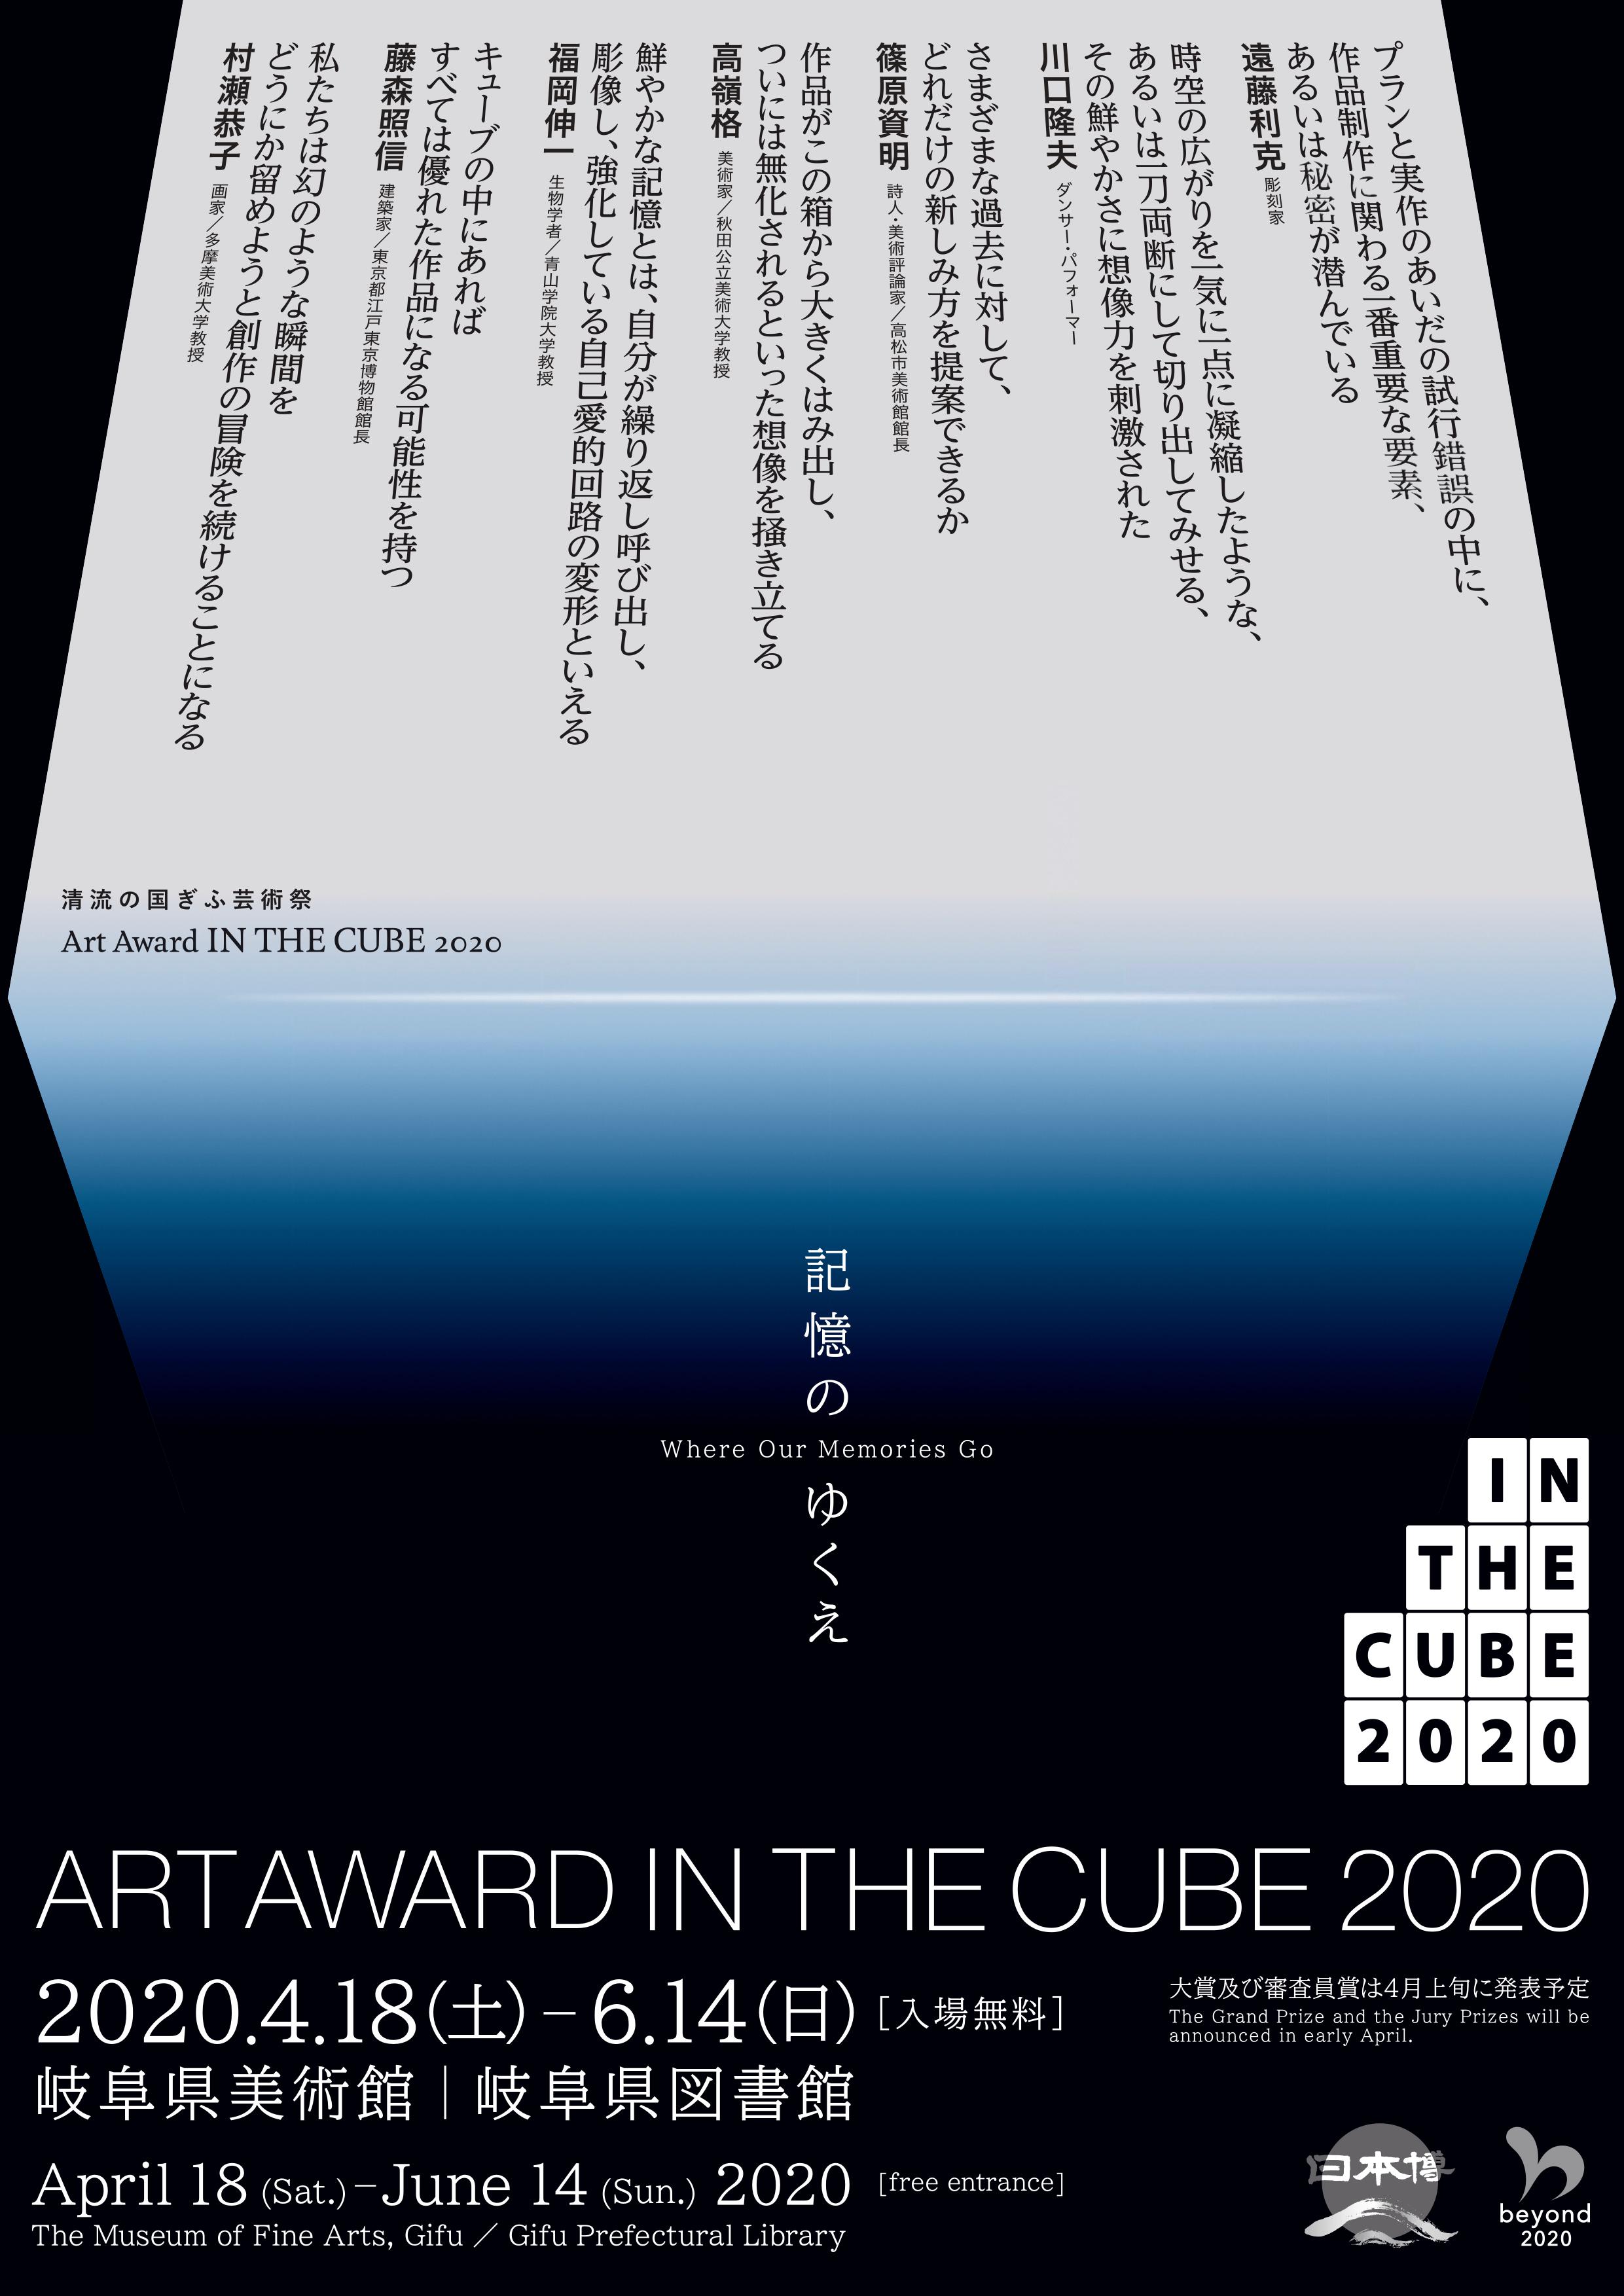 ART AWARD IN THE CUBE 2020 EXHIBITION